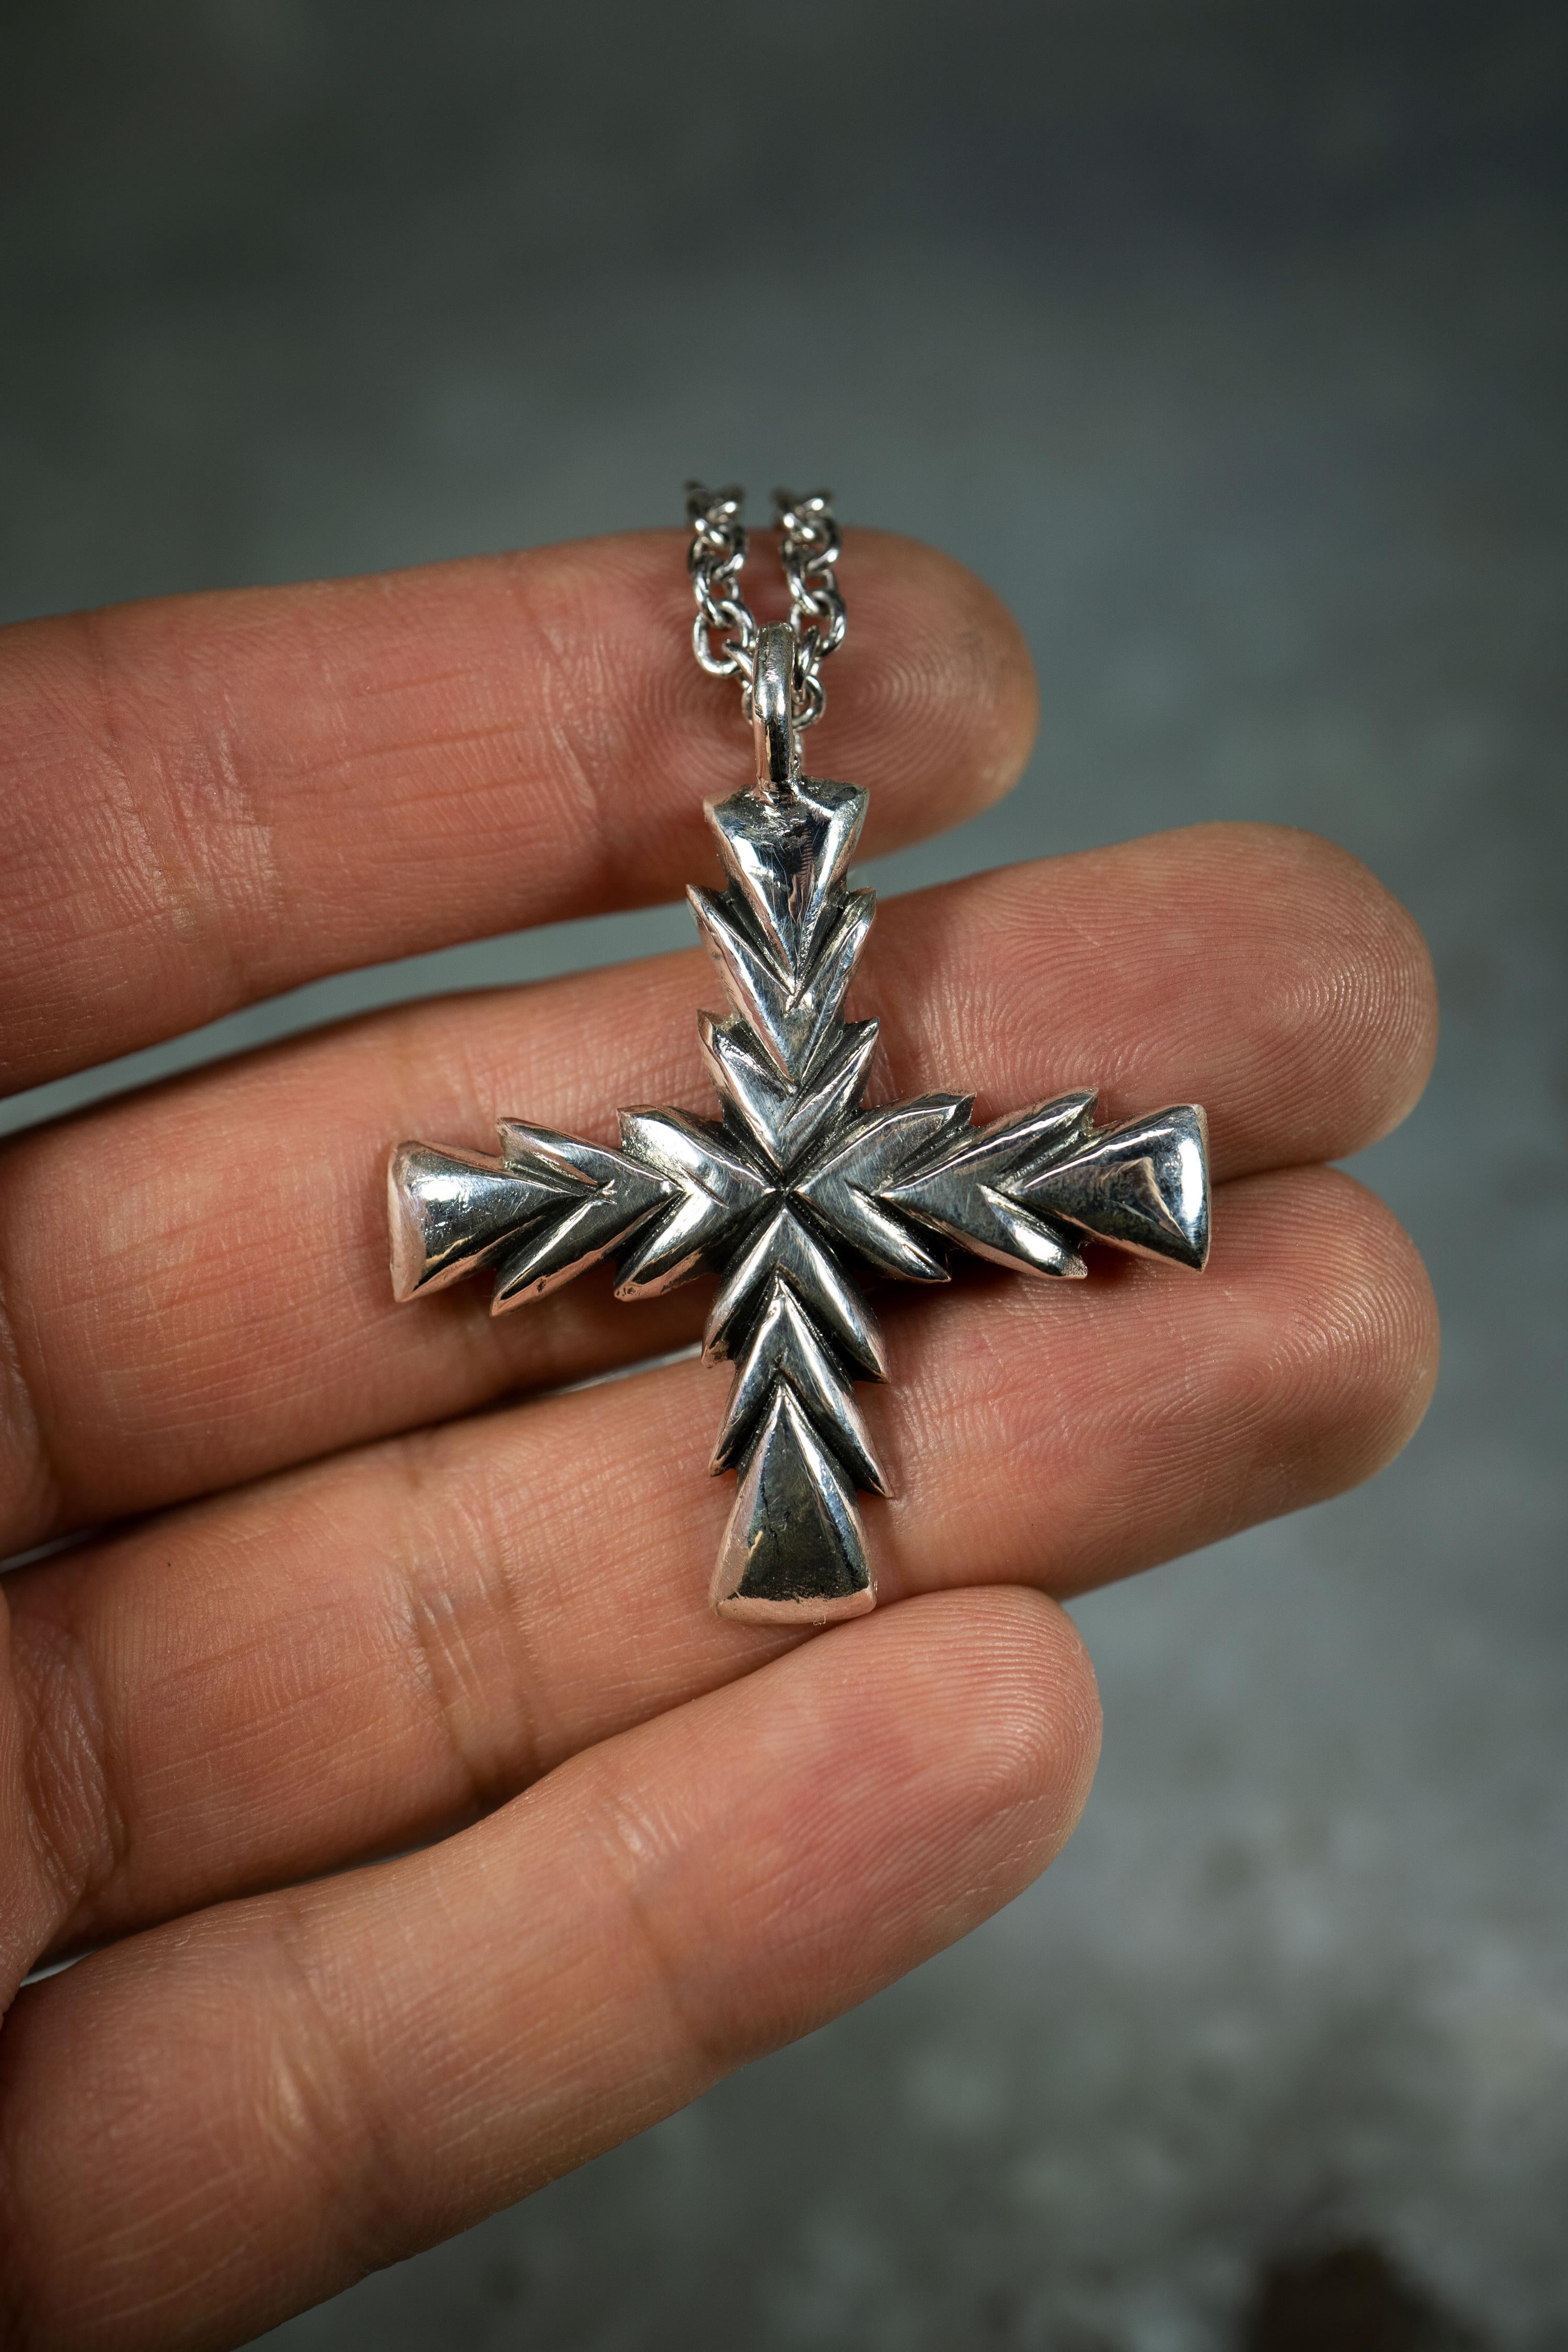 Ken Fury's original version of the cross pendant is a striking and meaningful piece of wearable art that is hand-carved and cast. The cross has a rich history that spans across many cultures and religions around the world, and this piece pays homage